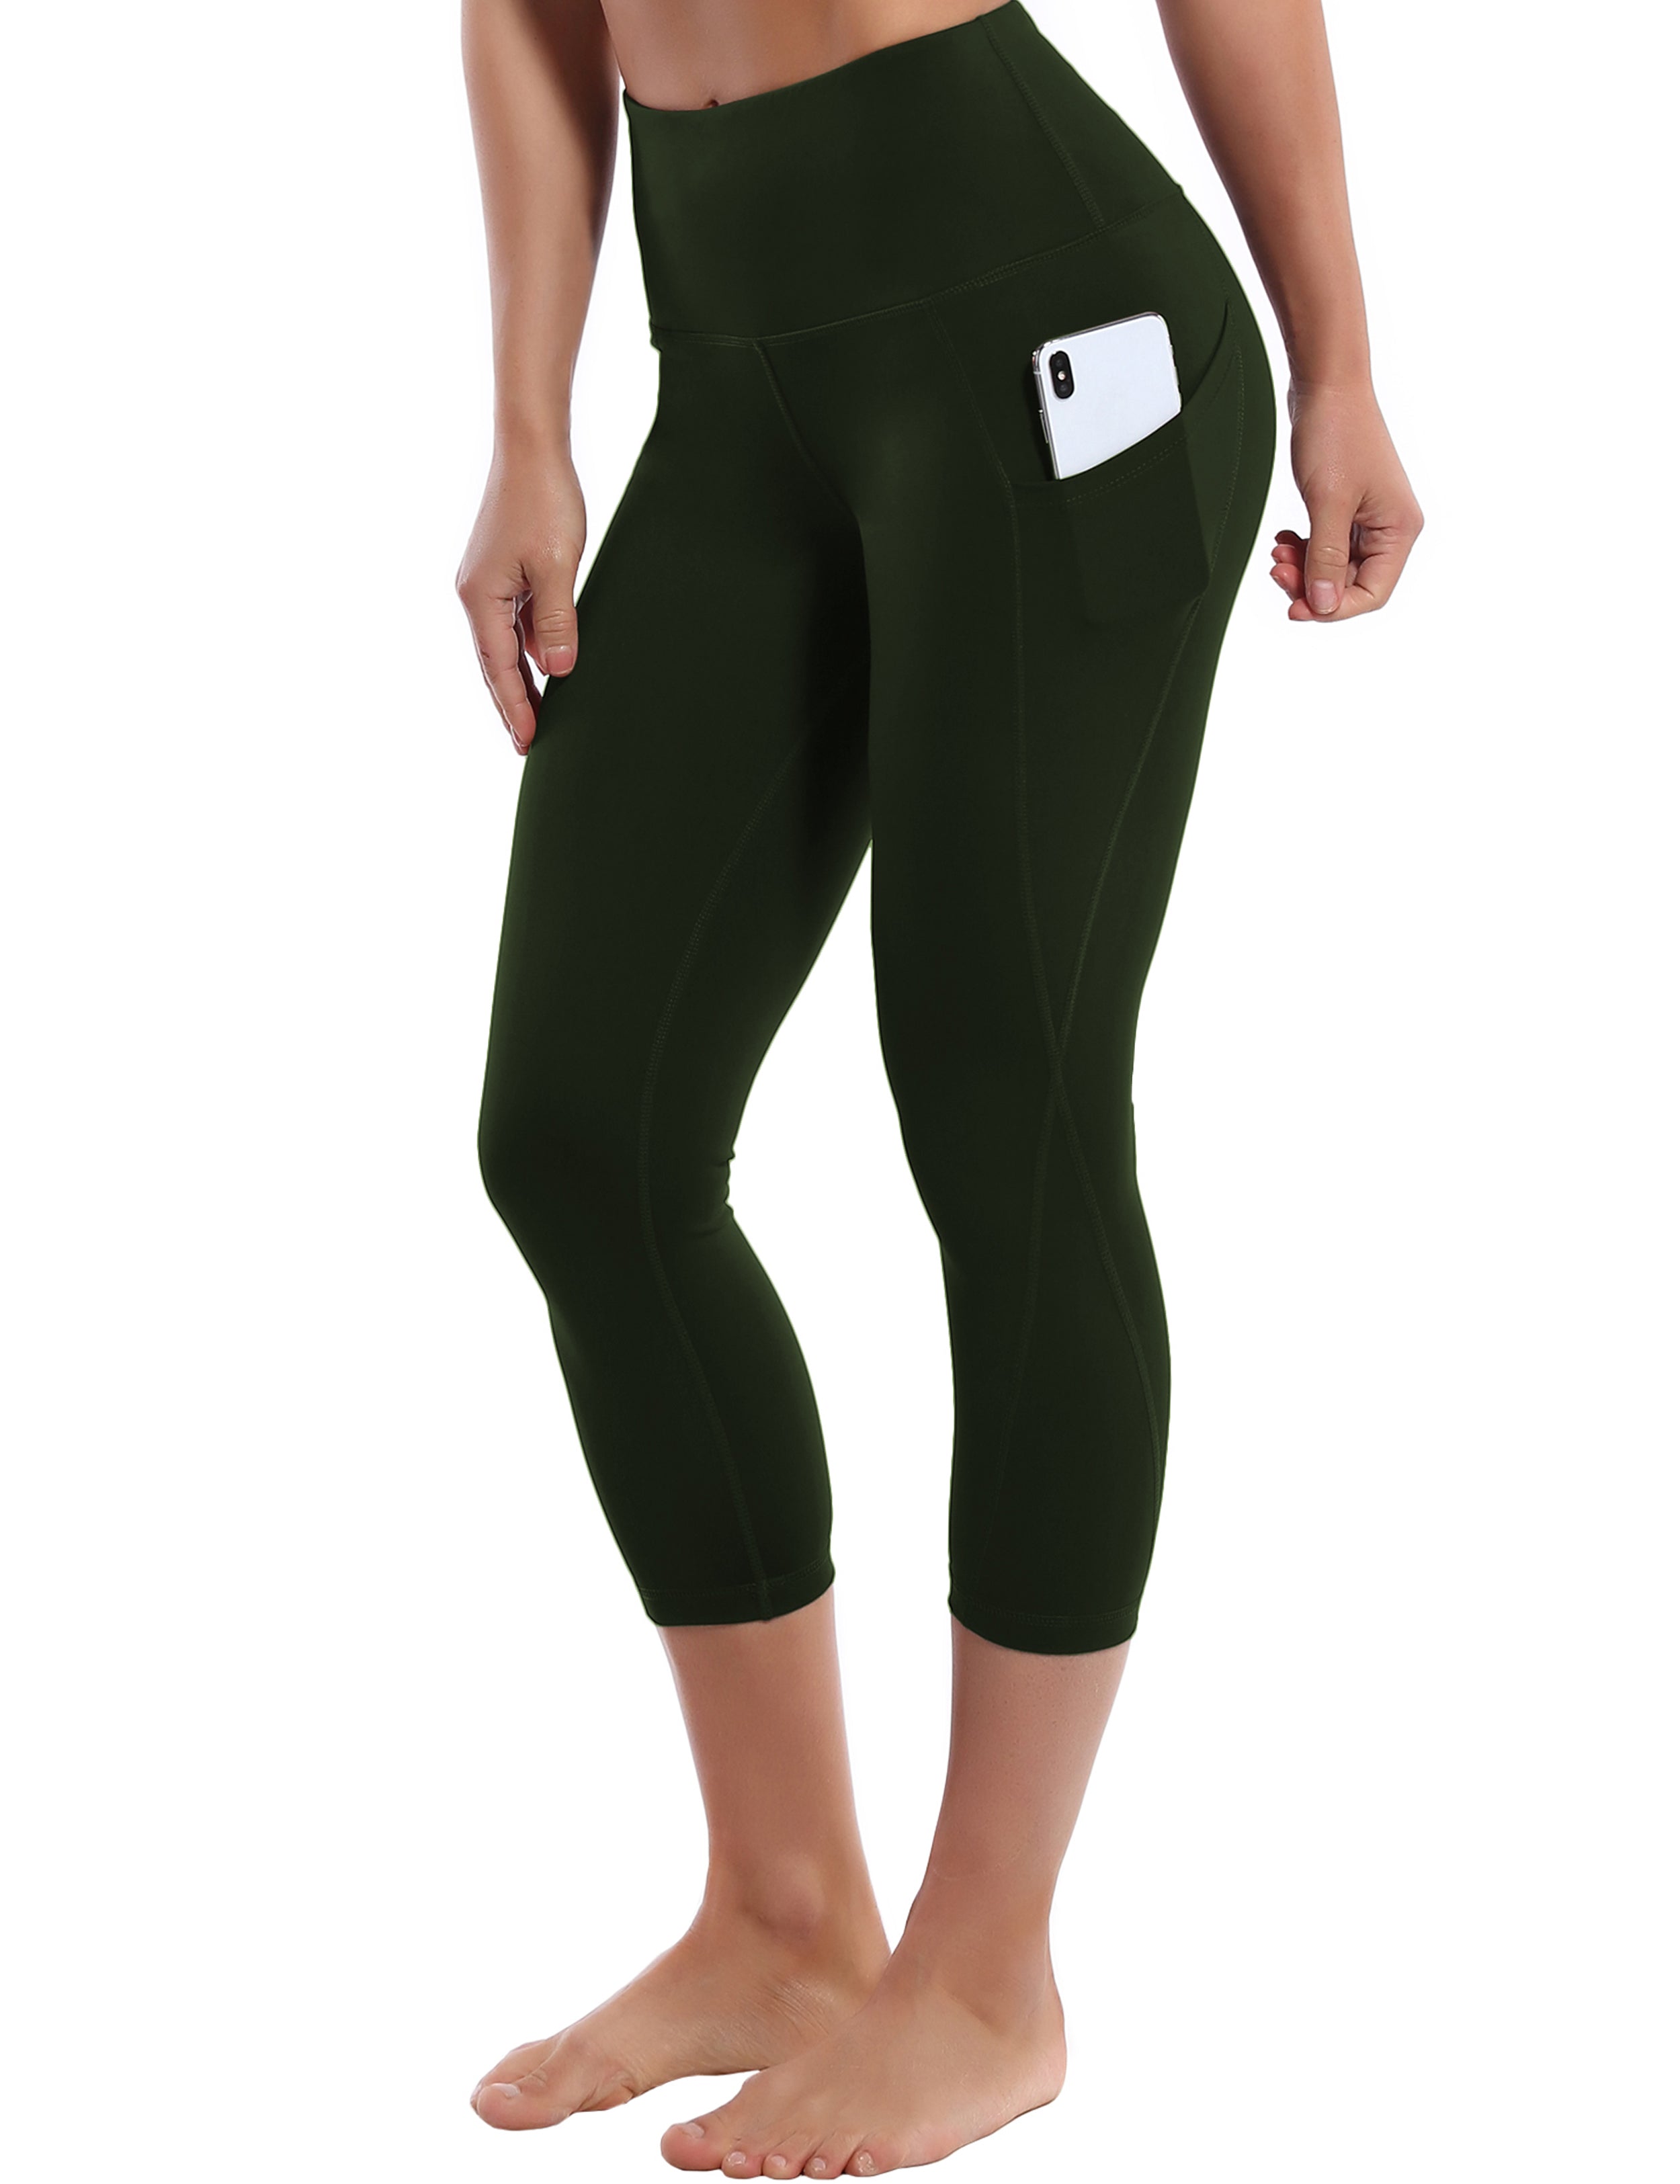 19" High Waist Side Pockets Capris olivegray 75%Nylon/25%Spandex Fabric doesn't attract lint easily 4-way stretch No see-through Moisture-wicking Tummy control Inner pocket